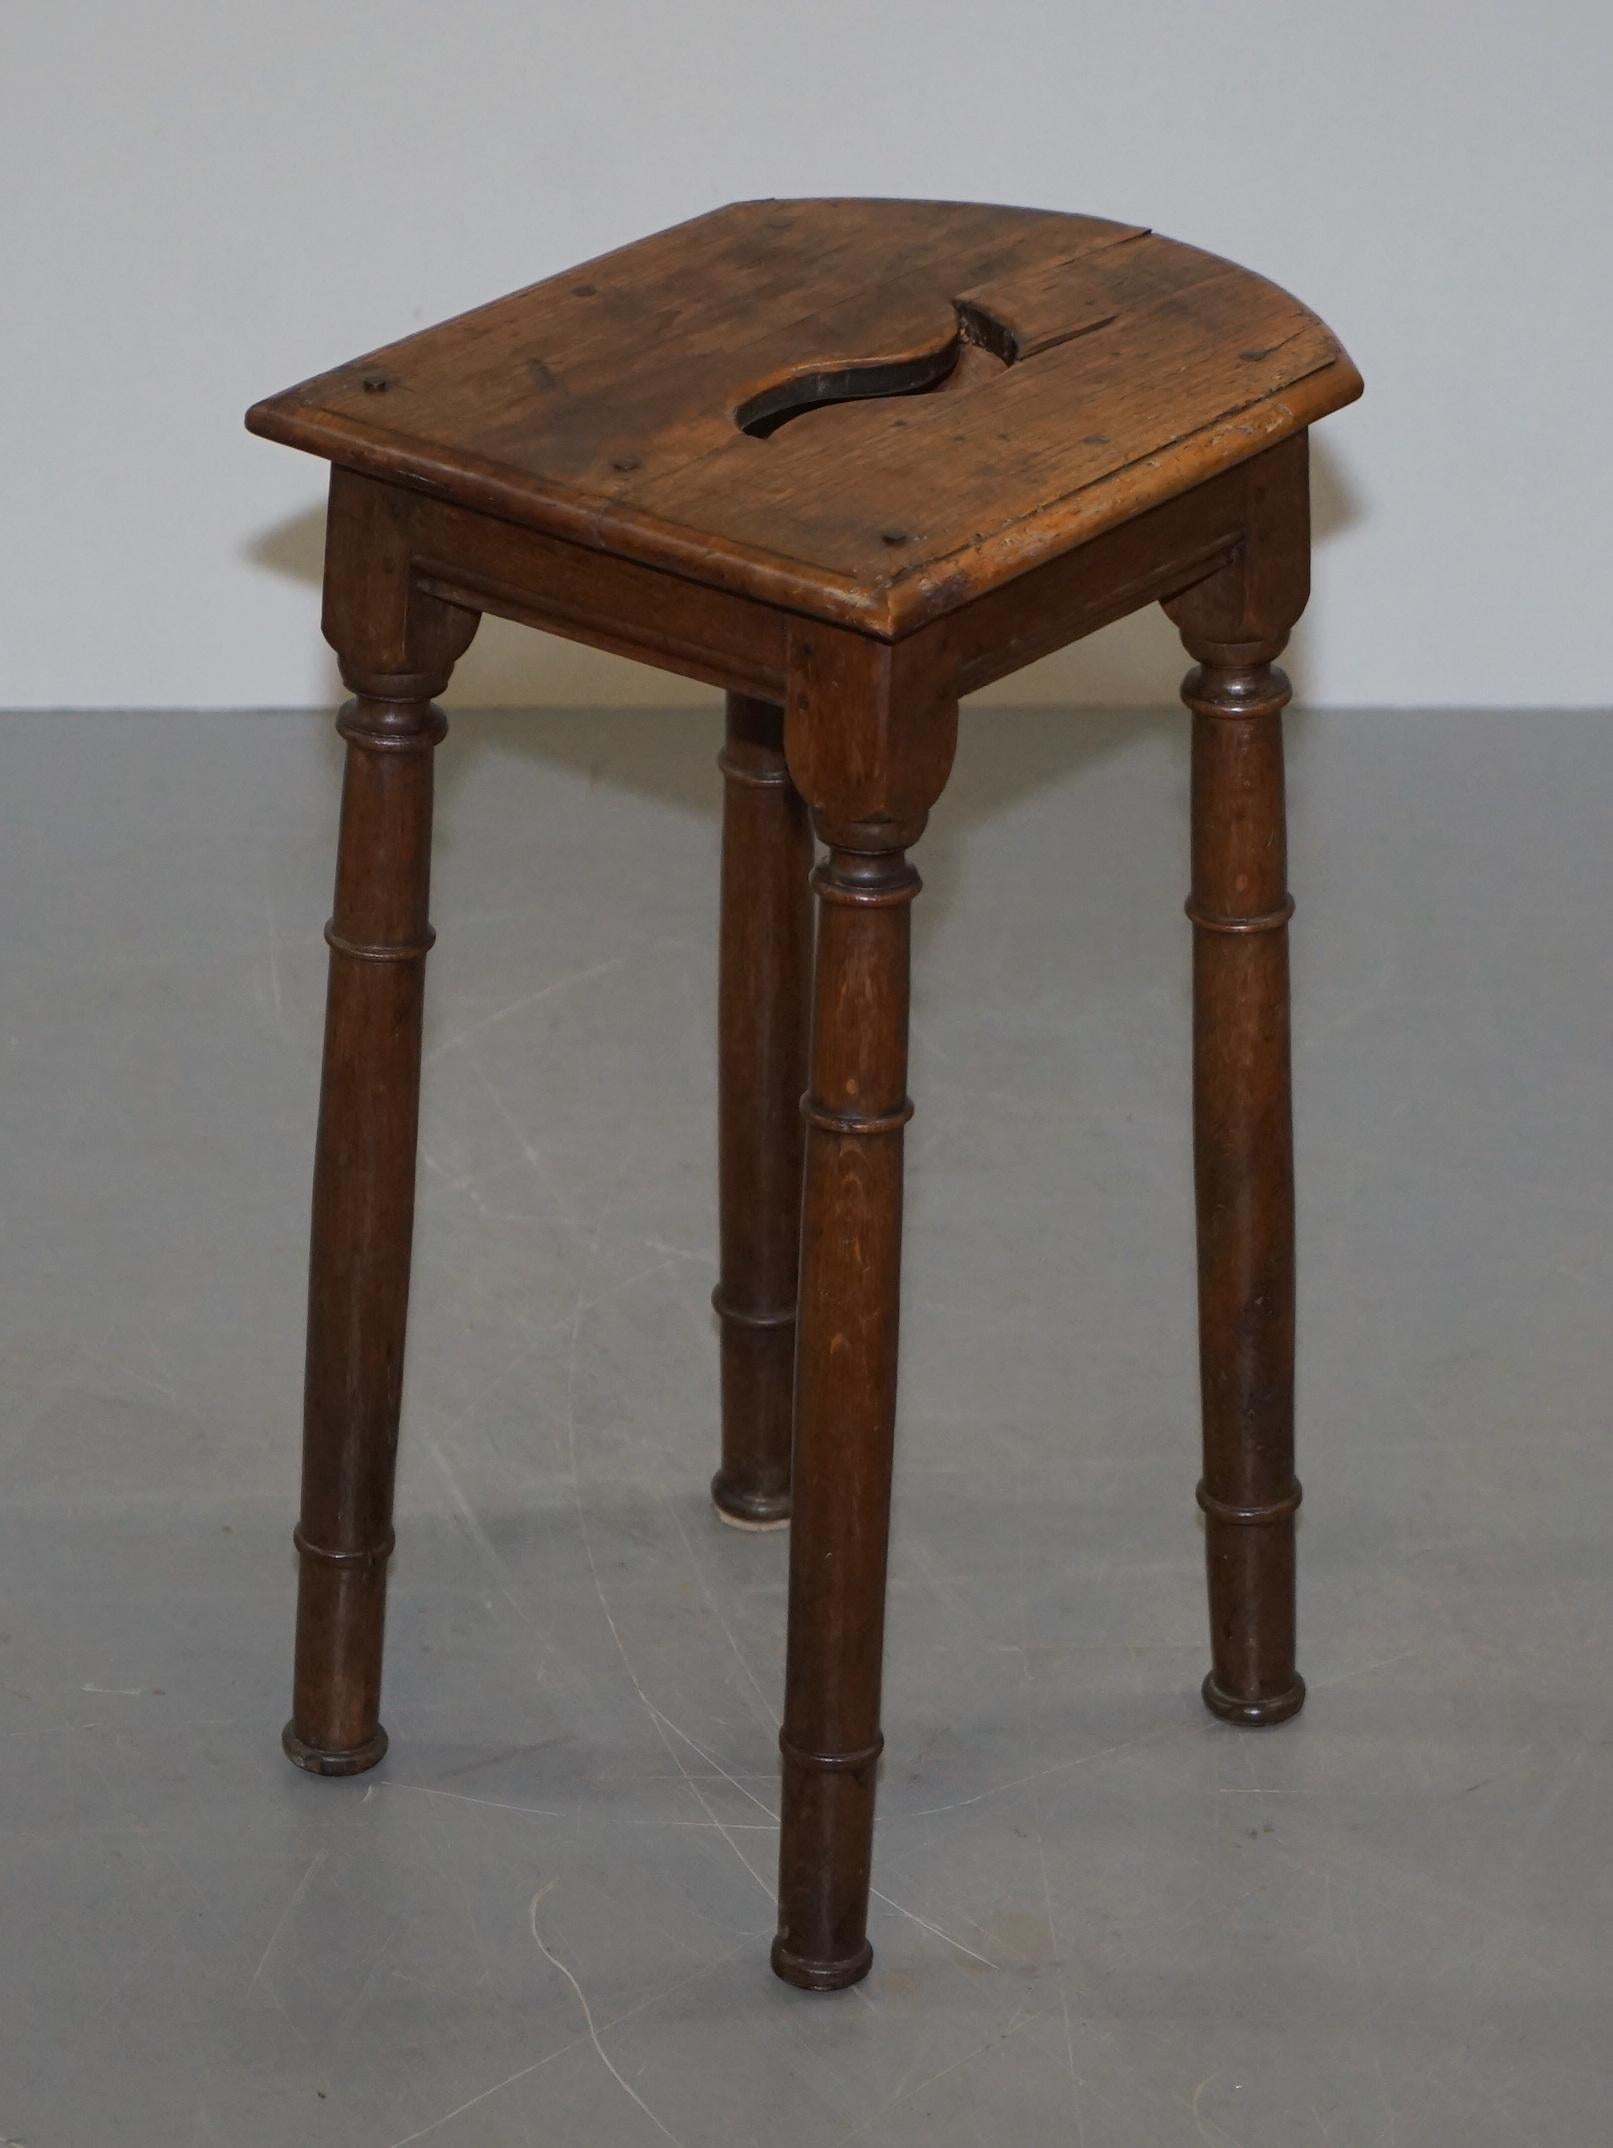 Danish Lovely 18th Century Dutch Stool with Handle Cut Out in the Top Bar Pub Study